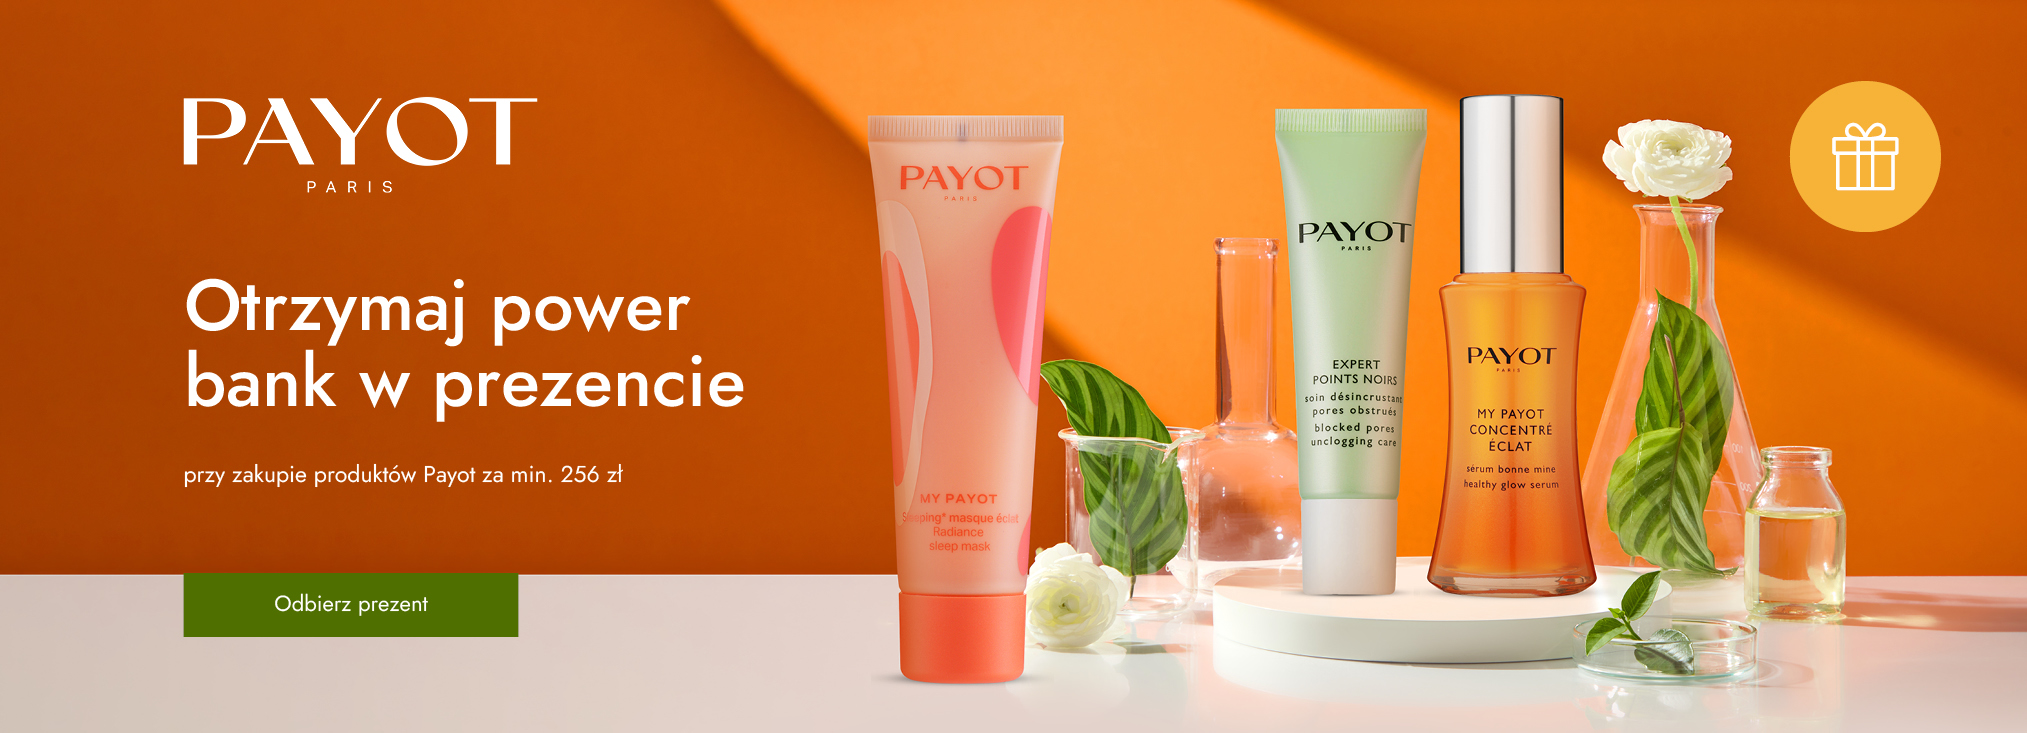 Payot_face